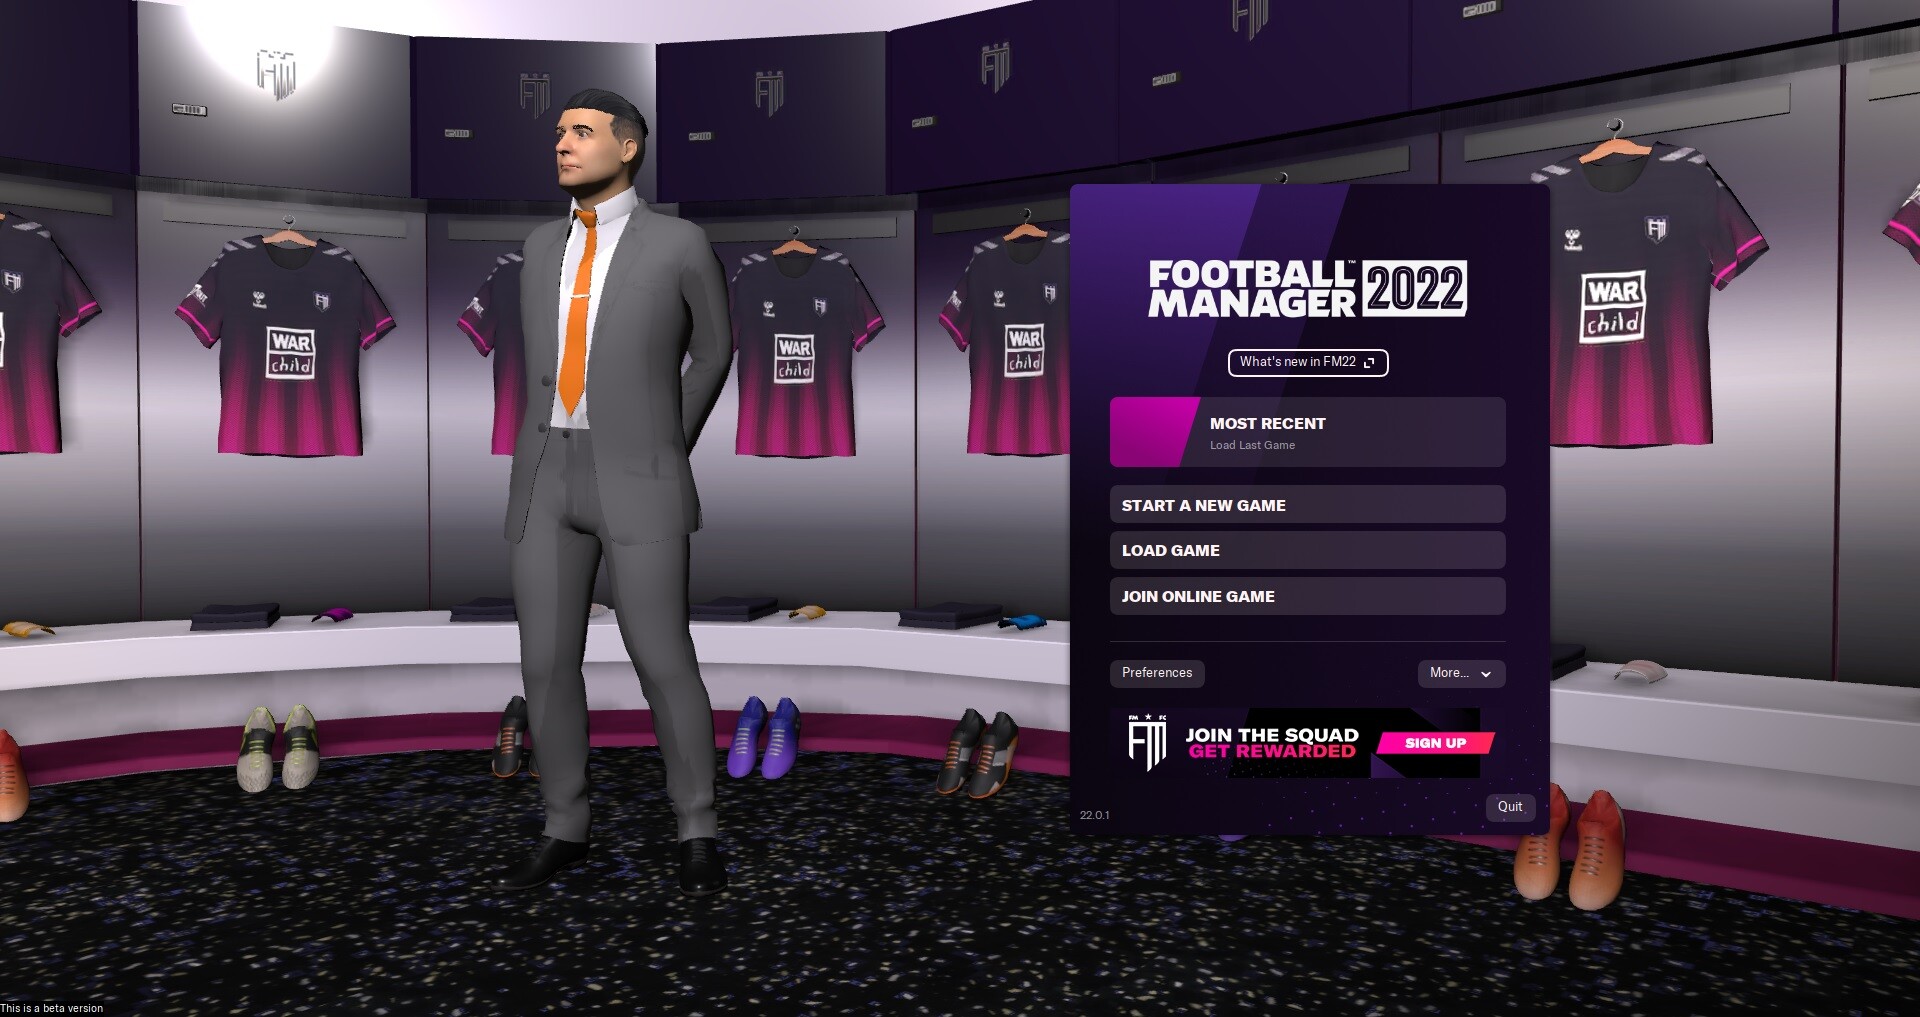 football manager 2022 price